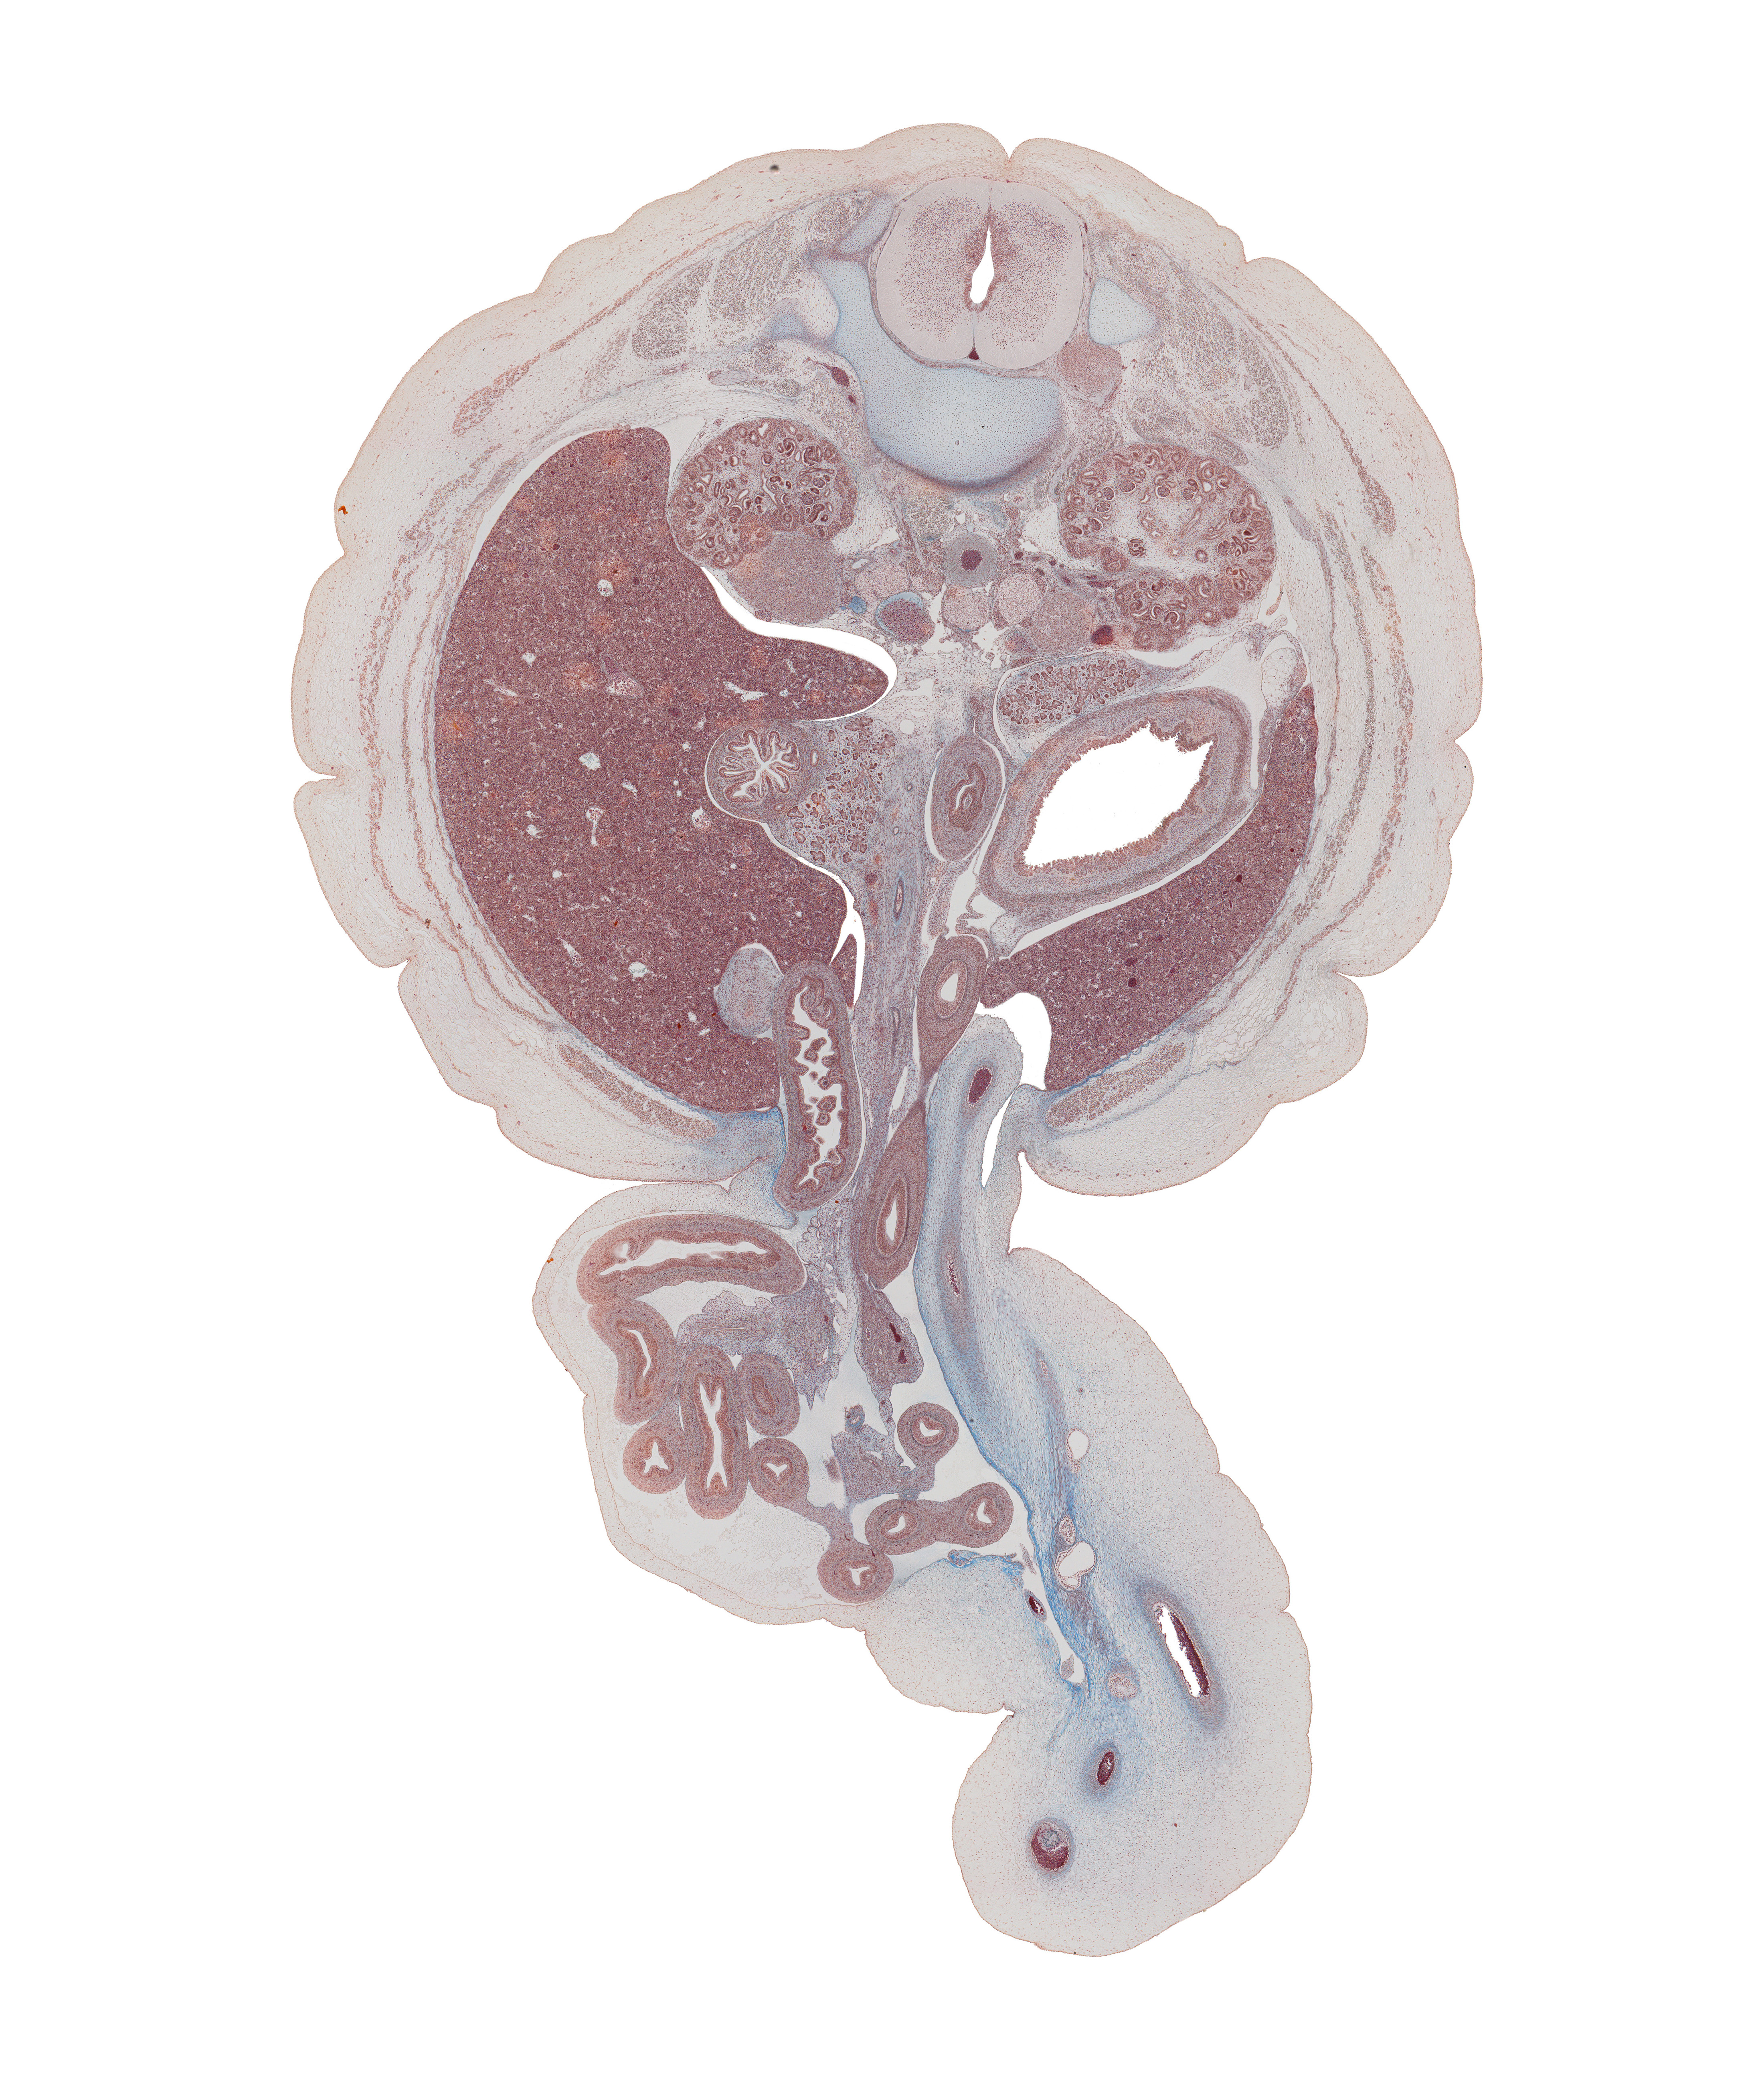 L-1 spinal ganglion, allantoic vesicle(s), anterior wall of stomach, aorta, ascending part of duodenum, colon, descending part of duodenum, edge of urachus, extension of umbilical coelom, gall bladder, head of ventral pancreas, herniated intestines, hilum of kidney (metanephros), inferior vena cava, jejunum, kidney (metanephros), left umbilical artery, lesser sac (omental bursa), mesocolon, right umbilical artery, superior mesenteric artery, superior pancreaticoduodenal artery, suprarenal gland cortex, suprarenal gland medulla, umbilical cord, umbilical vein, umbilical vesicle stalk